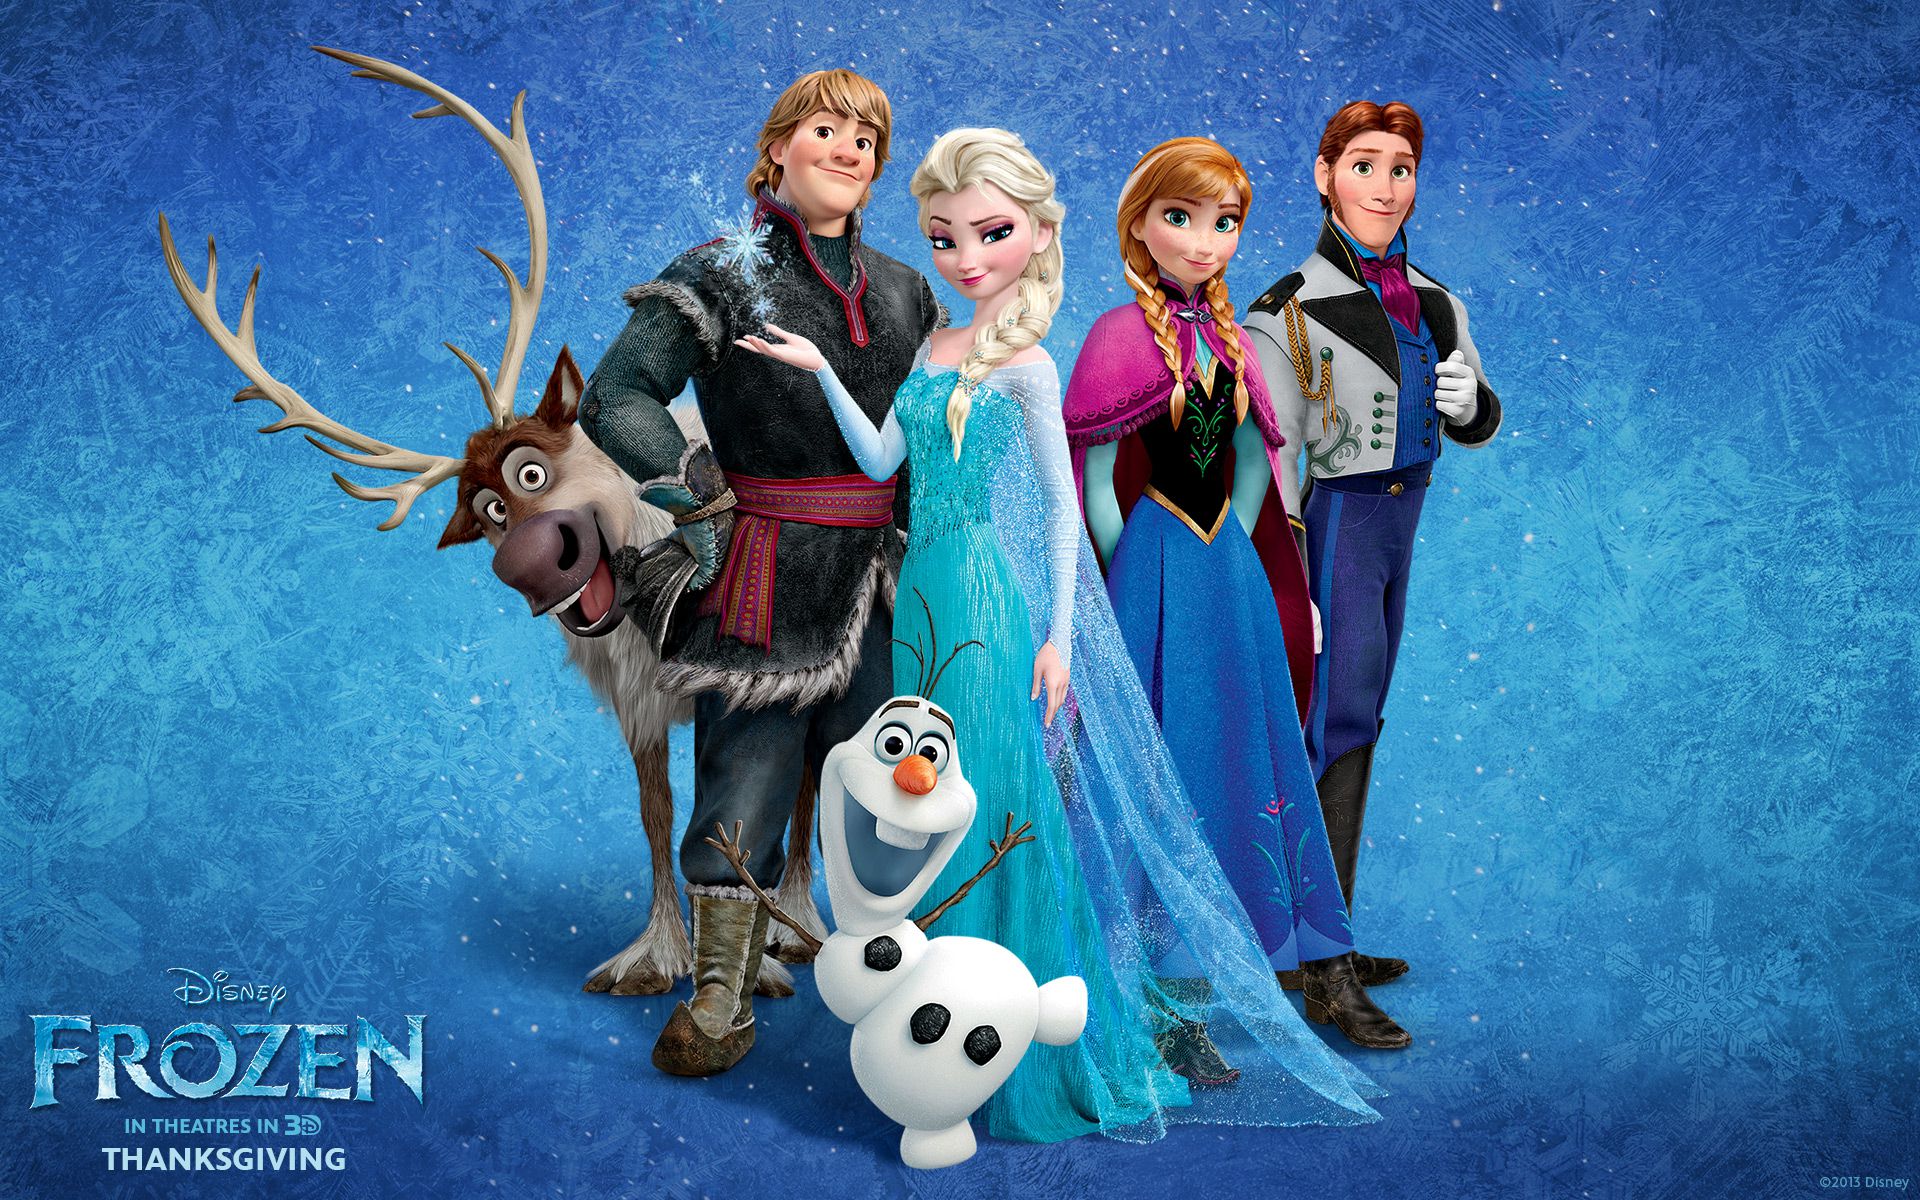 Download Frozen Full HD Wallpapers & Facebook Timeline Covers | CGfrog